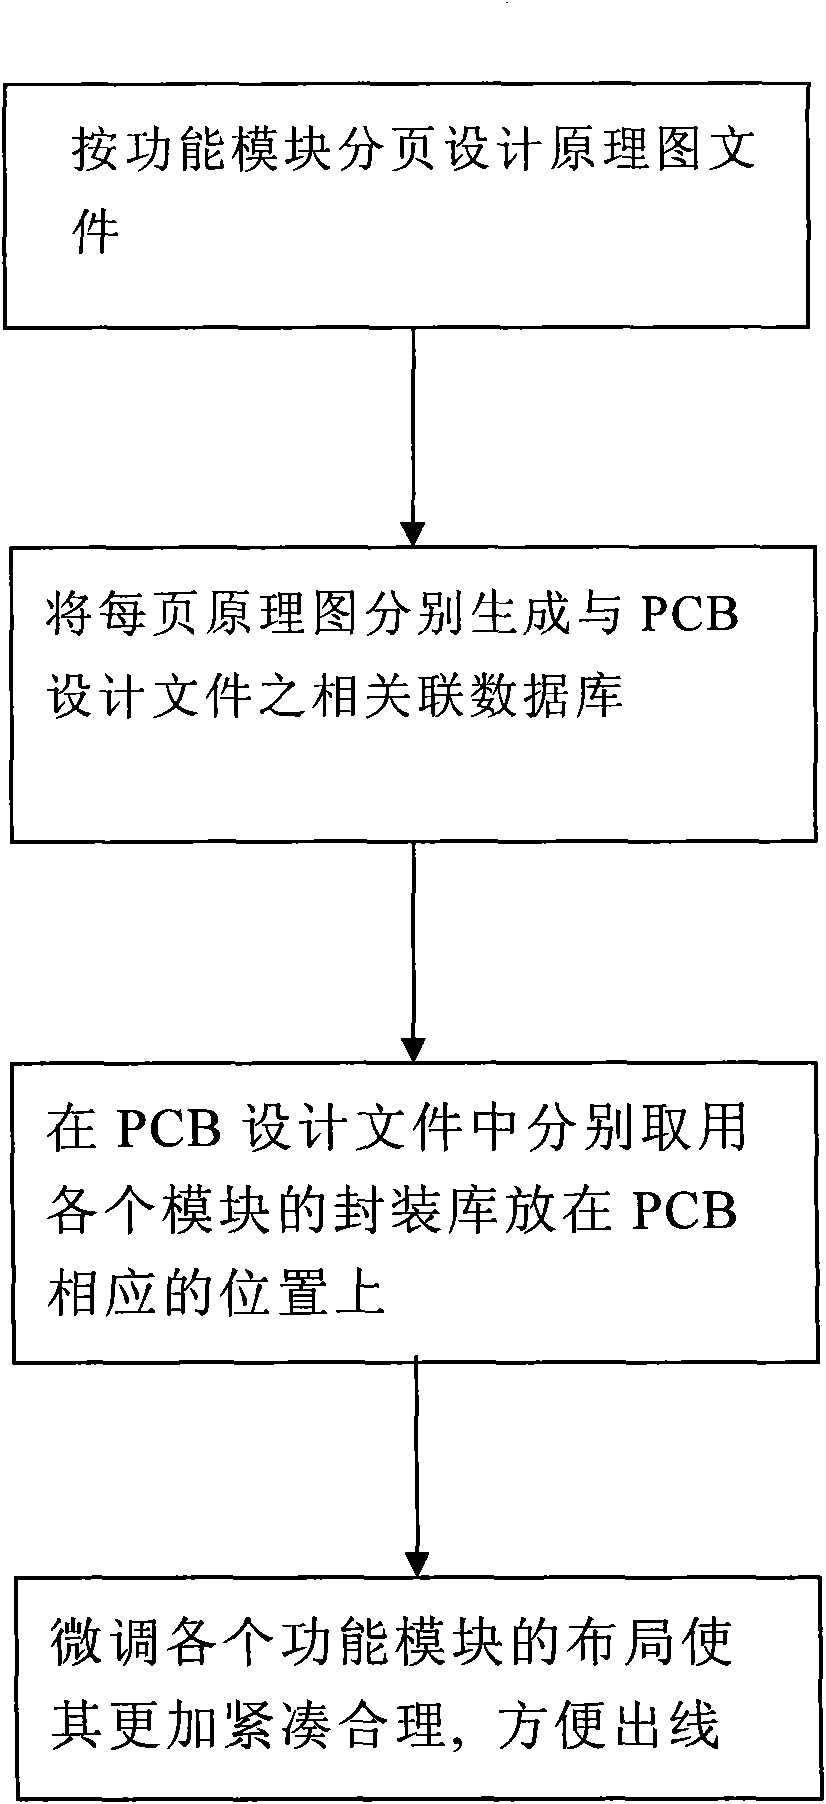 Method for introducing PCB design document from schematic diagram